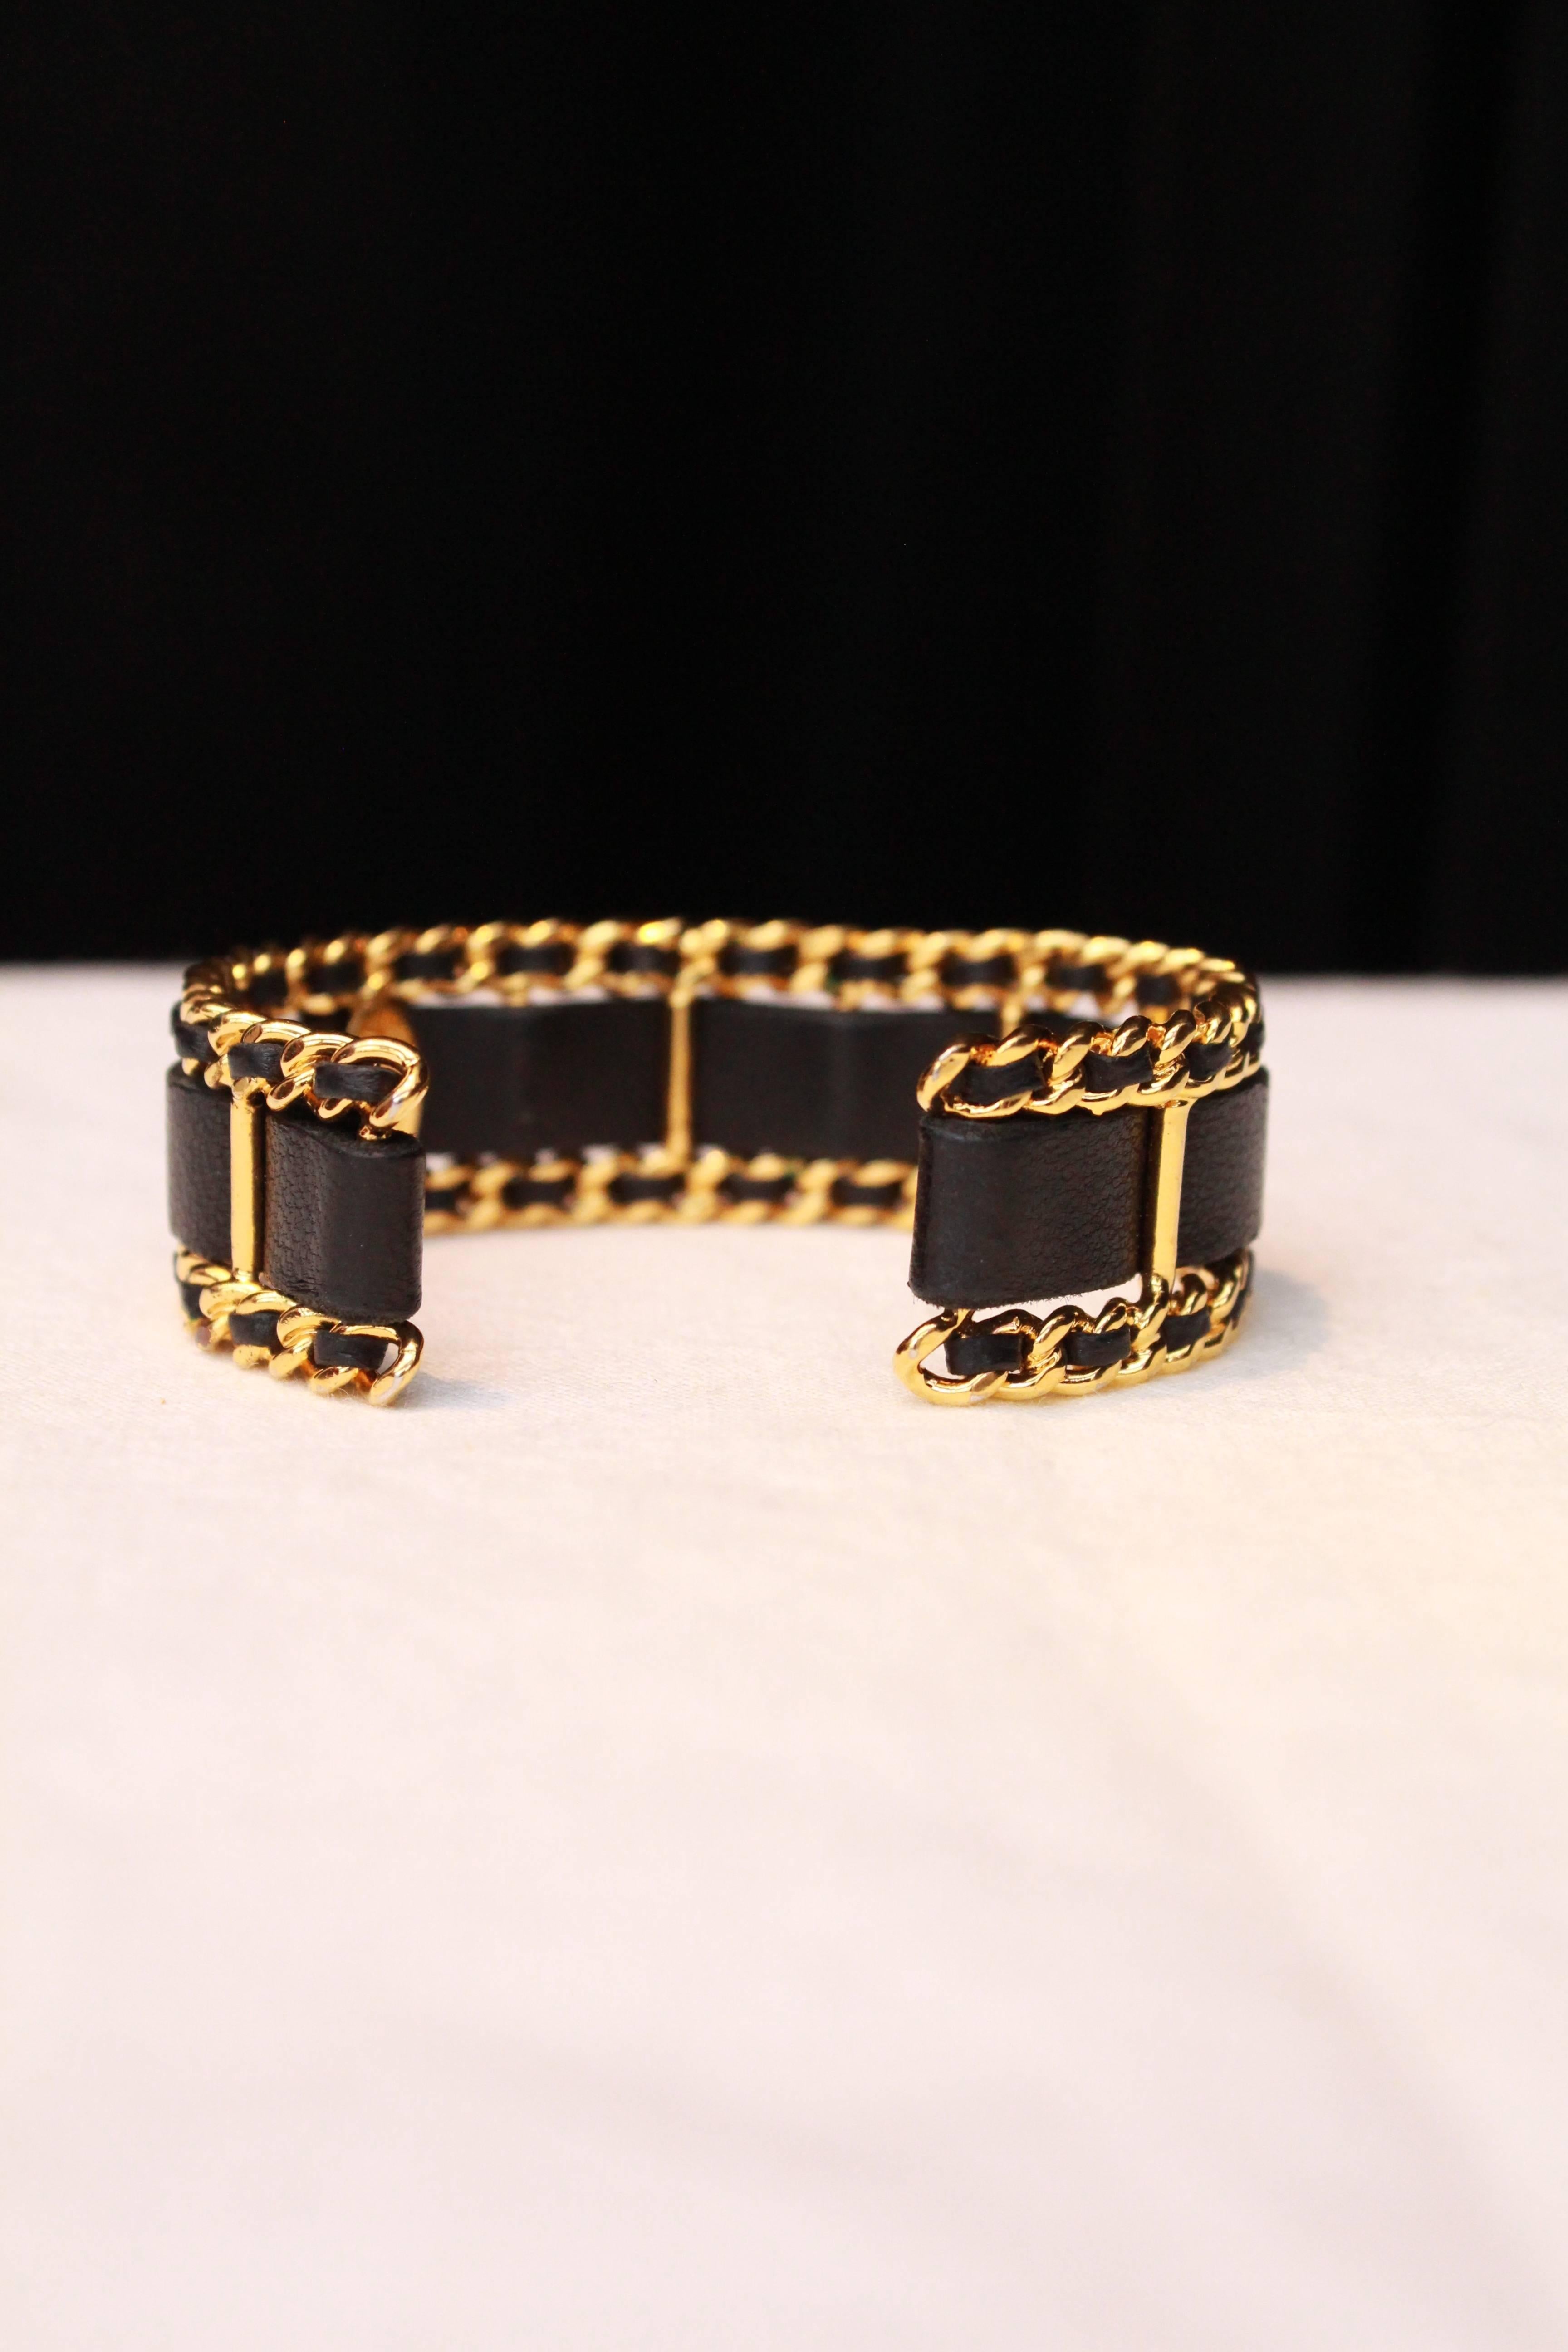 Women's 1990s Chanel black leather and and chain bangle cuff bracelet